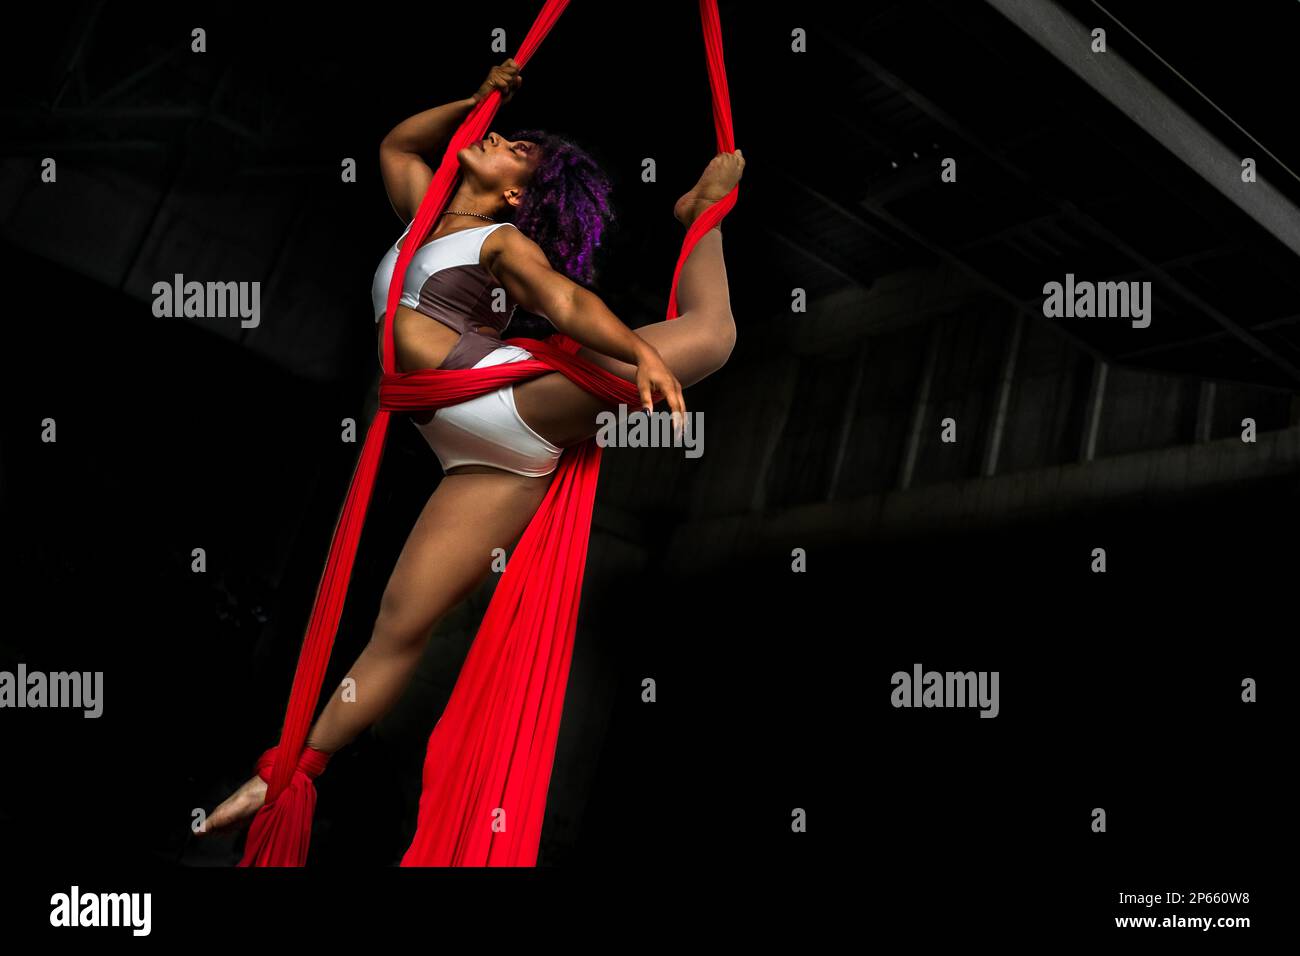 Mariale Contreras, a Venezuelan aerial dancer, performs on aerial silks during an art performance in an industrial space in Barranquilla, Colombia. Stock Photo